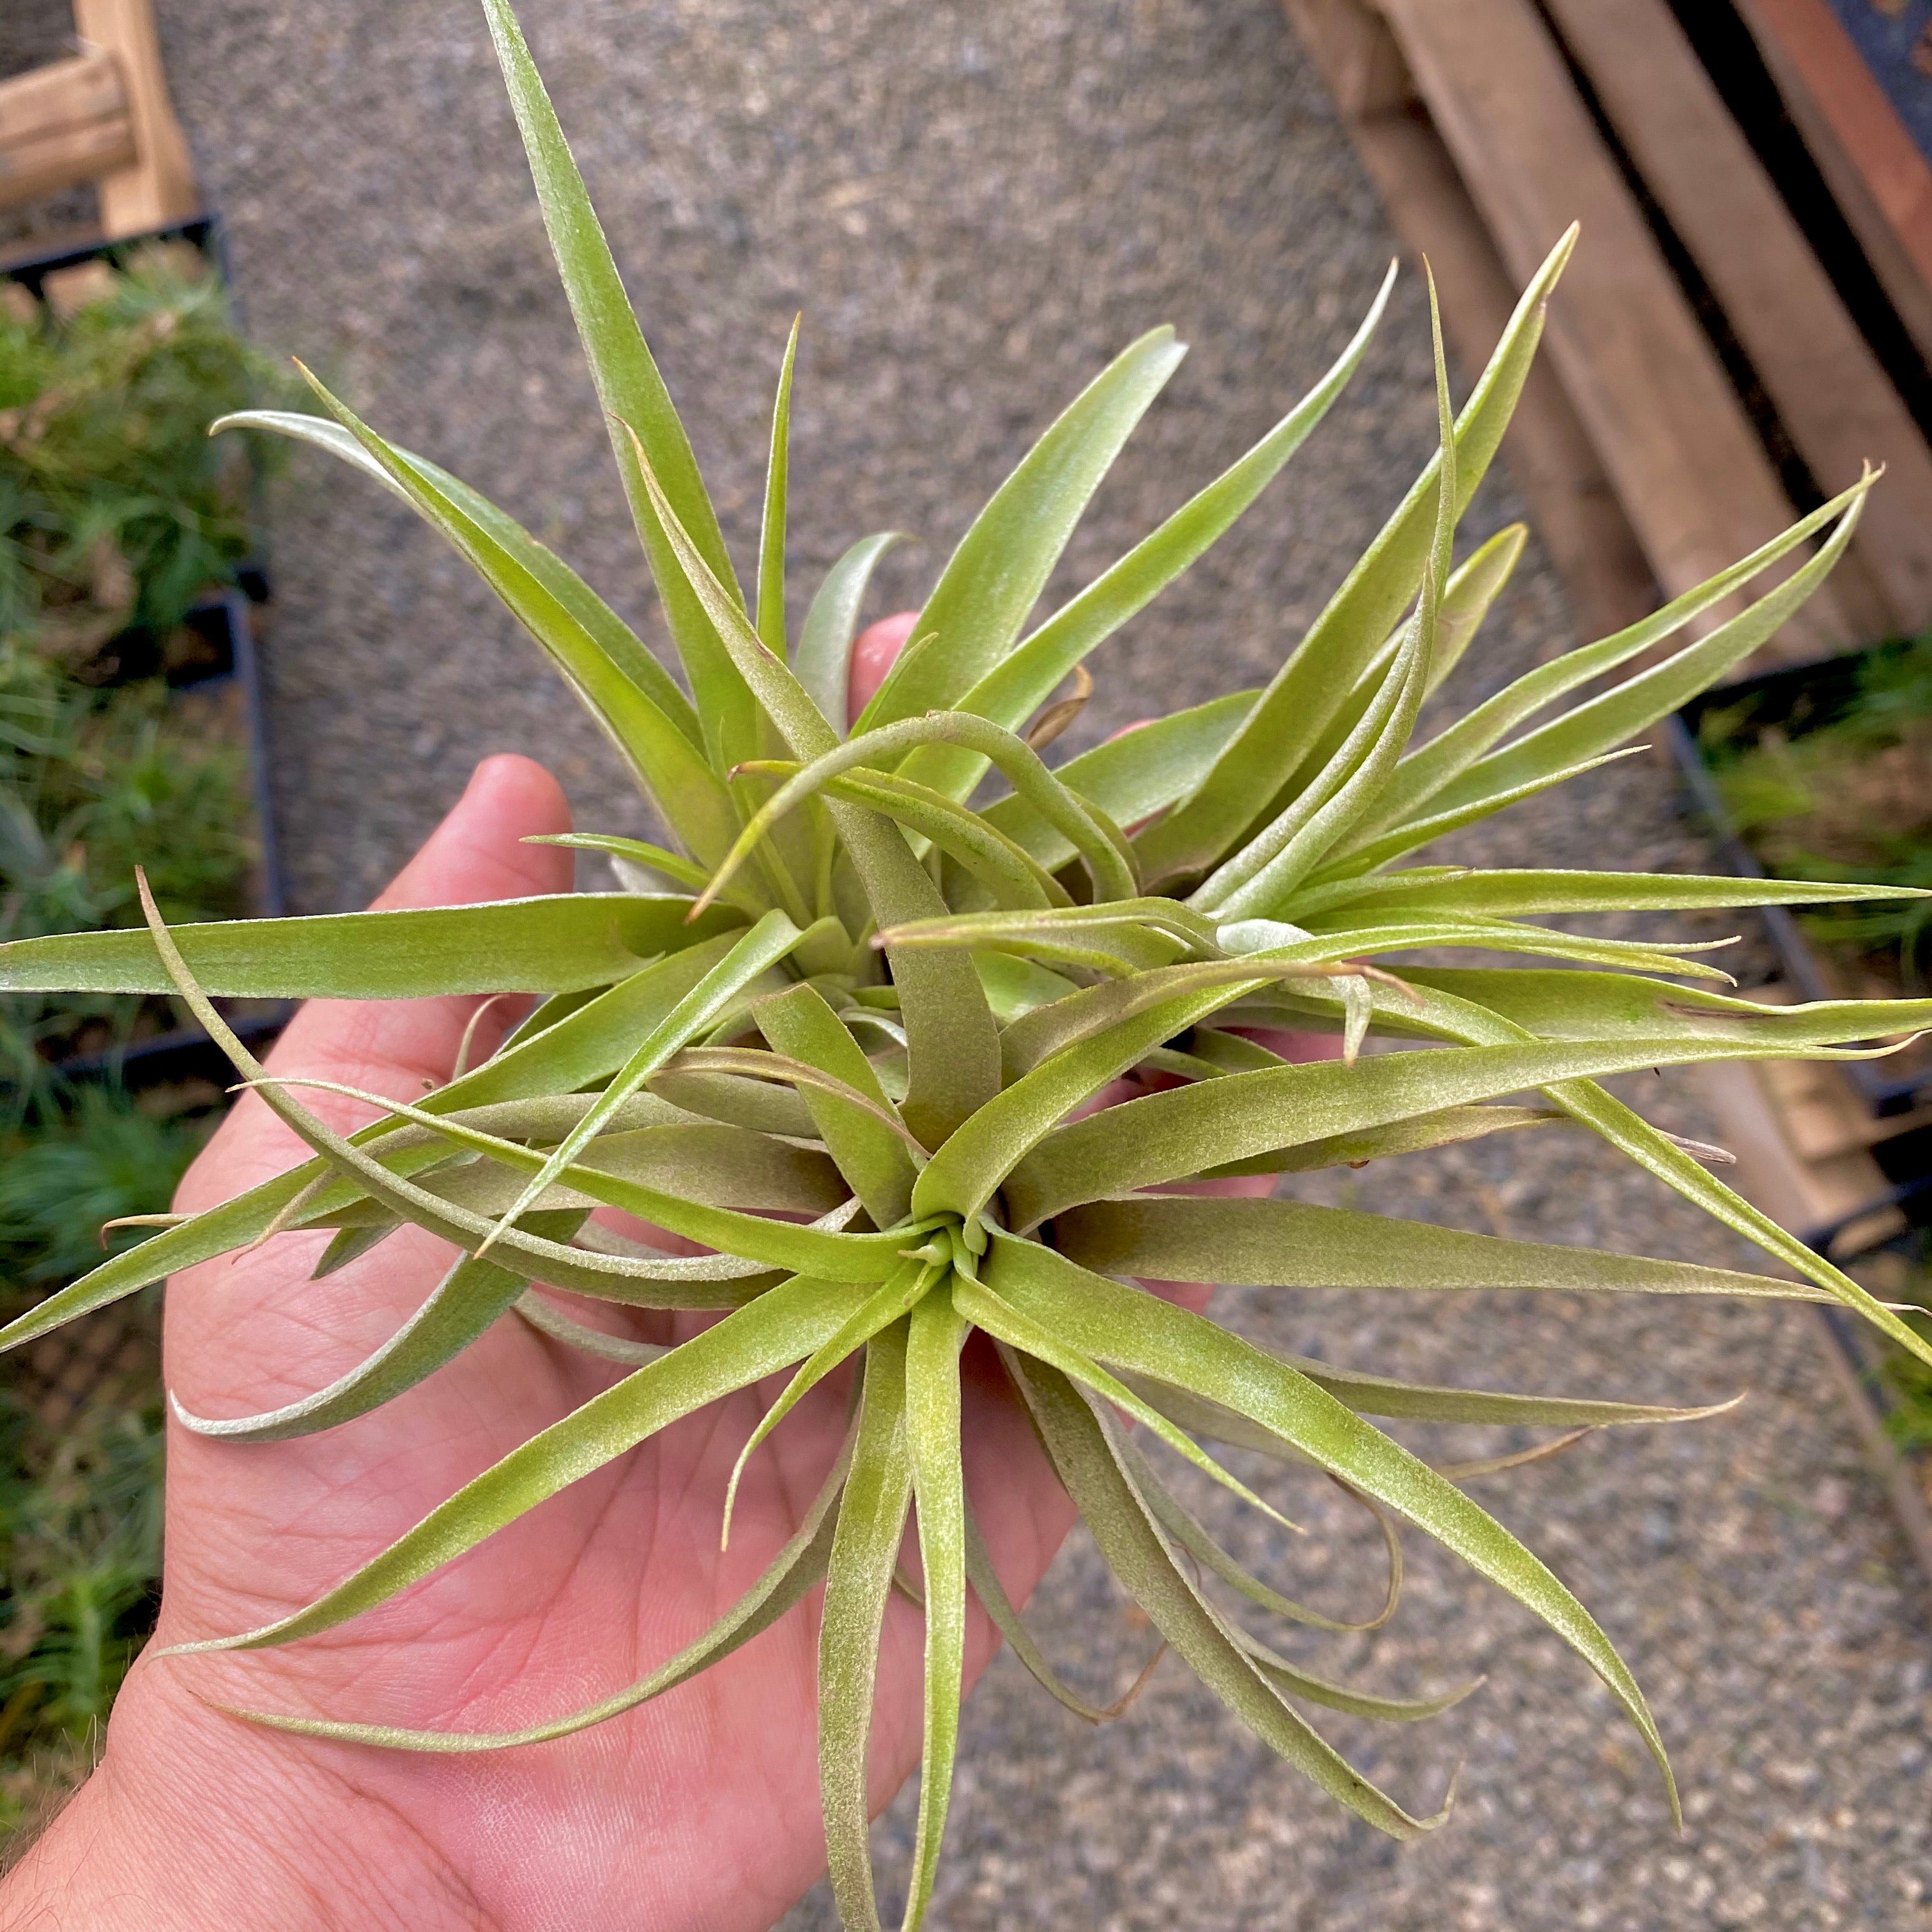 3 Tillandsia Capitata Peach Air Plants Decorations Being Held in Hand. 